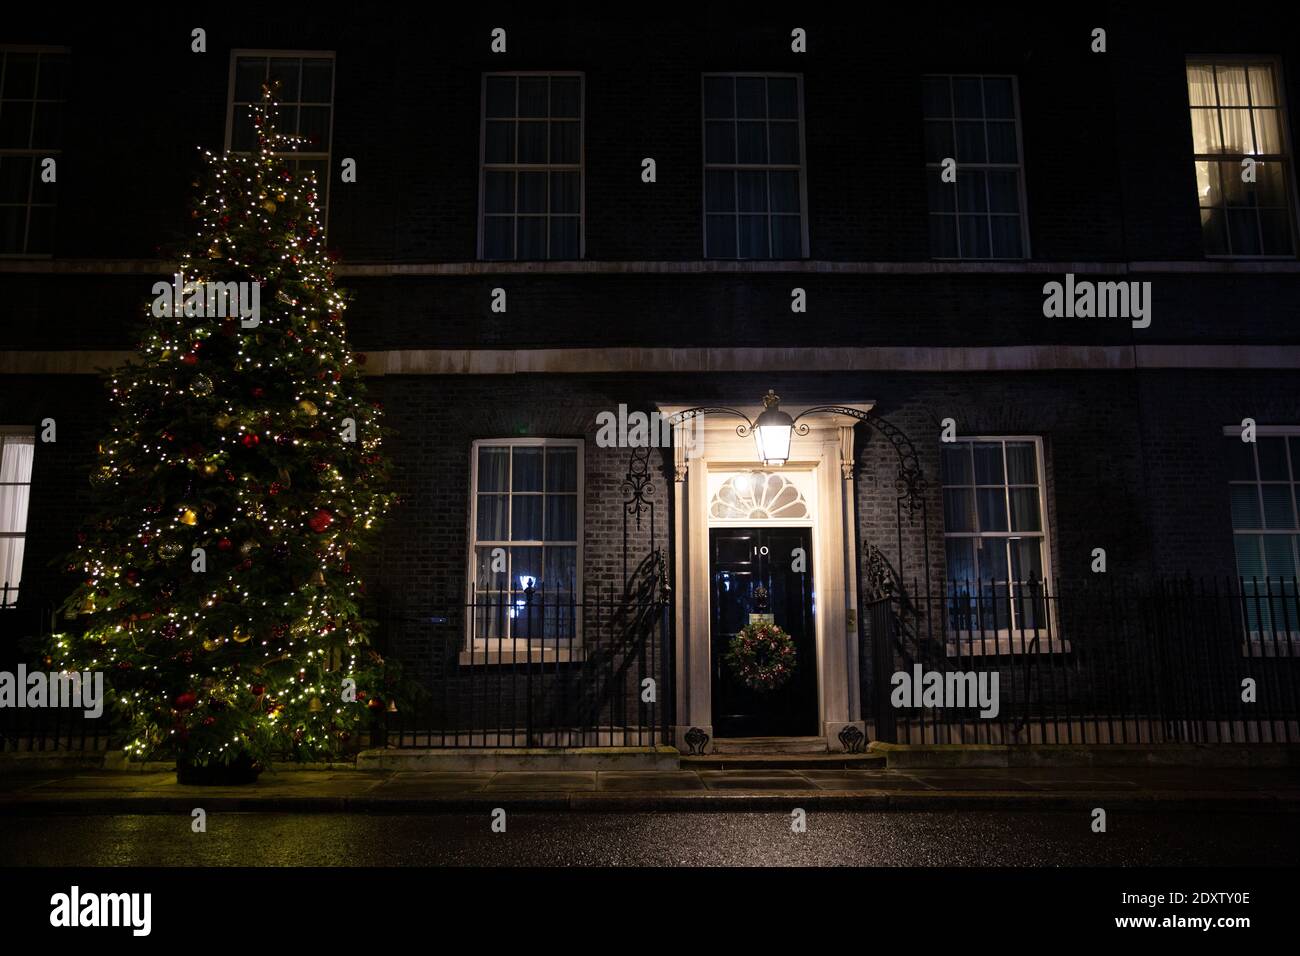 No.10 Downing Street awaits a trade deal between the UK Government and the EU Commission to seal the Brexit Stock Photo